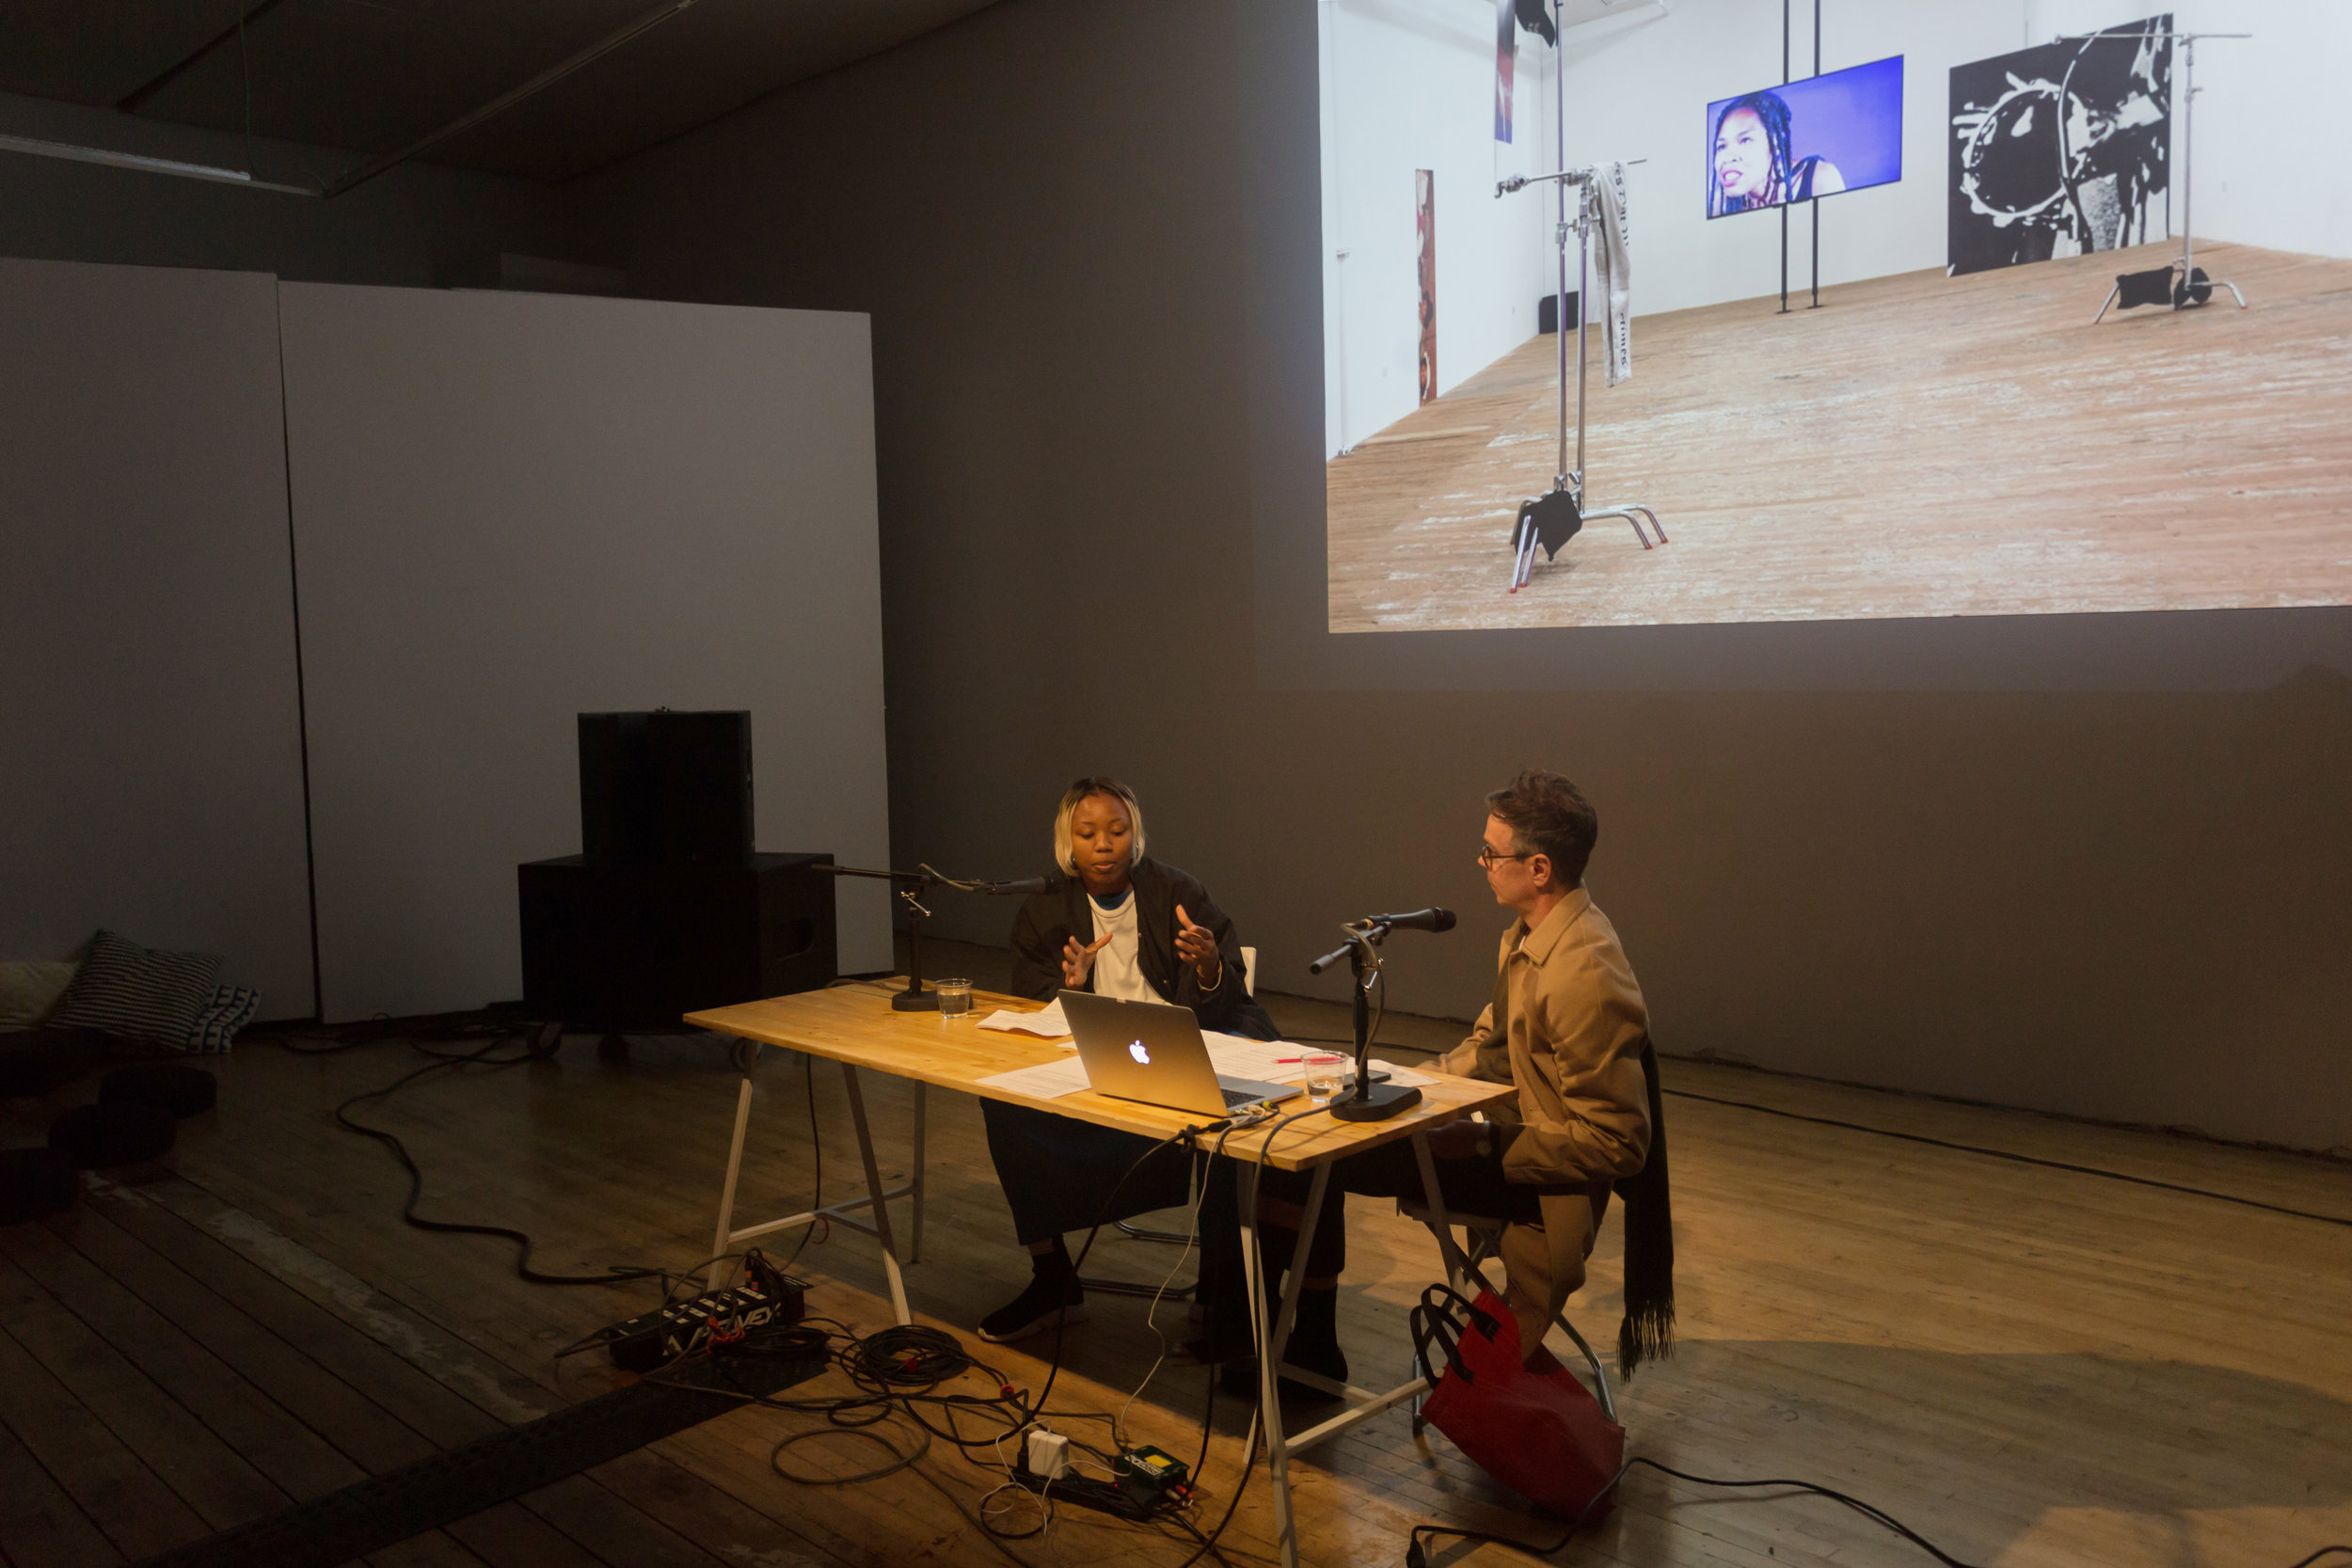  Martine Syms in conversation with James Voorhies, February 26, 2018. The Lab, San Francisco. 